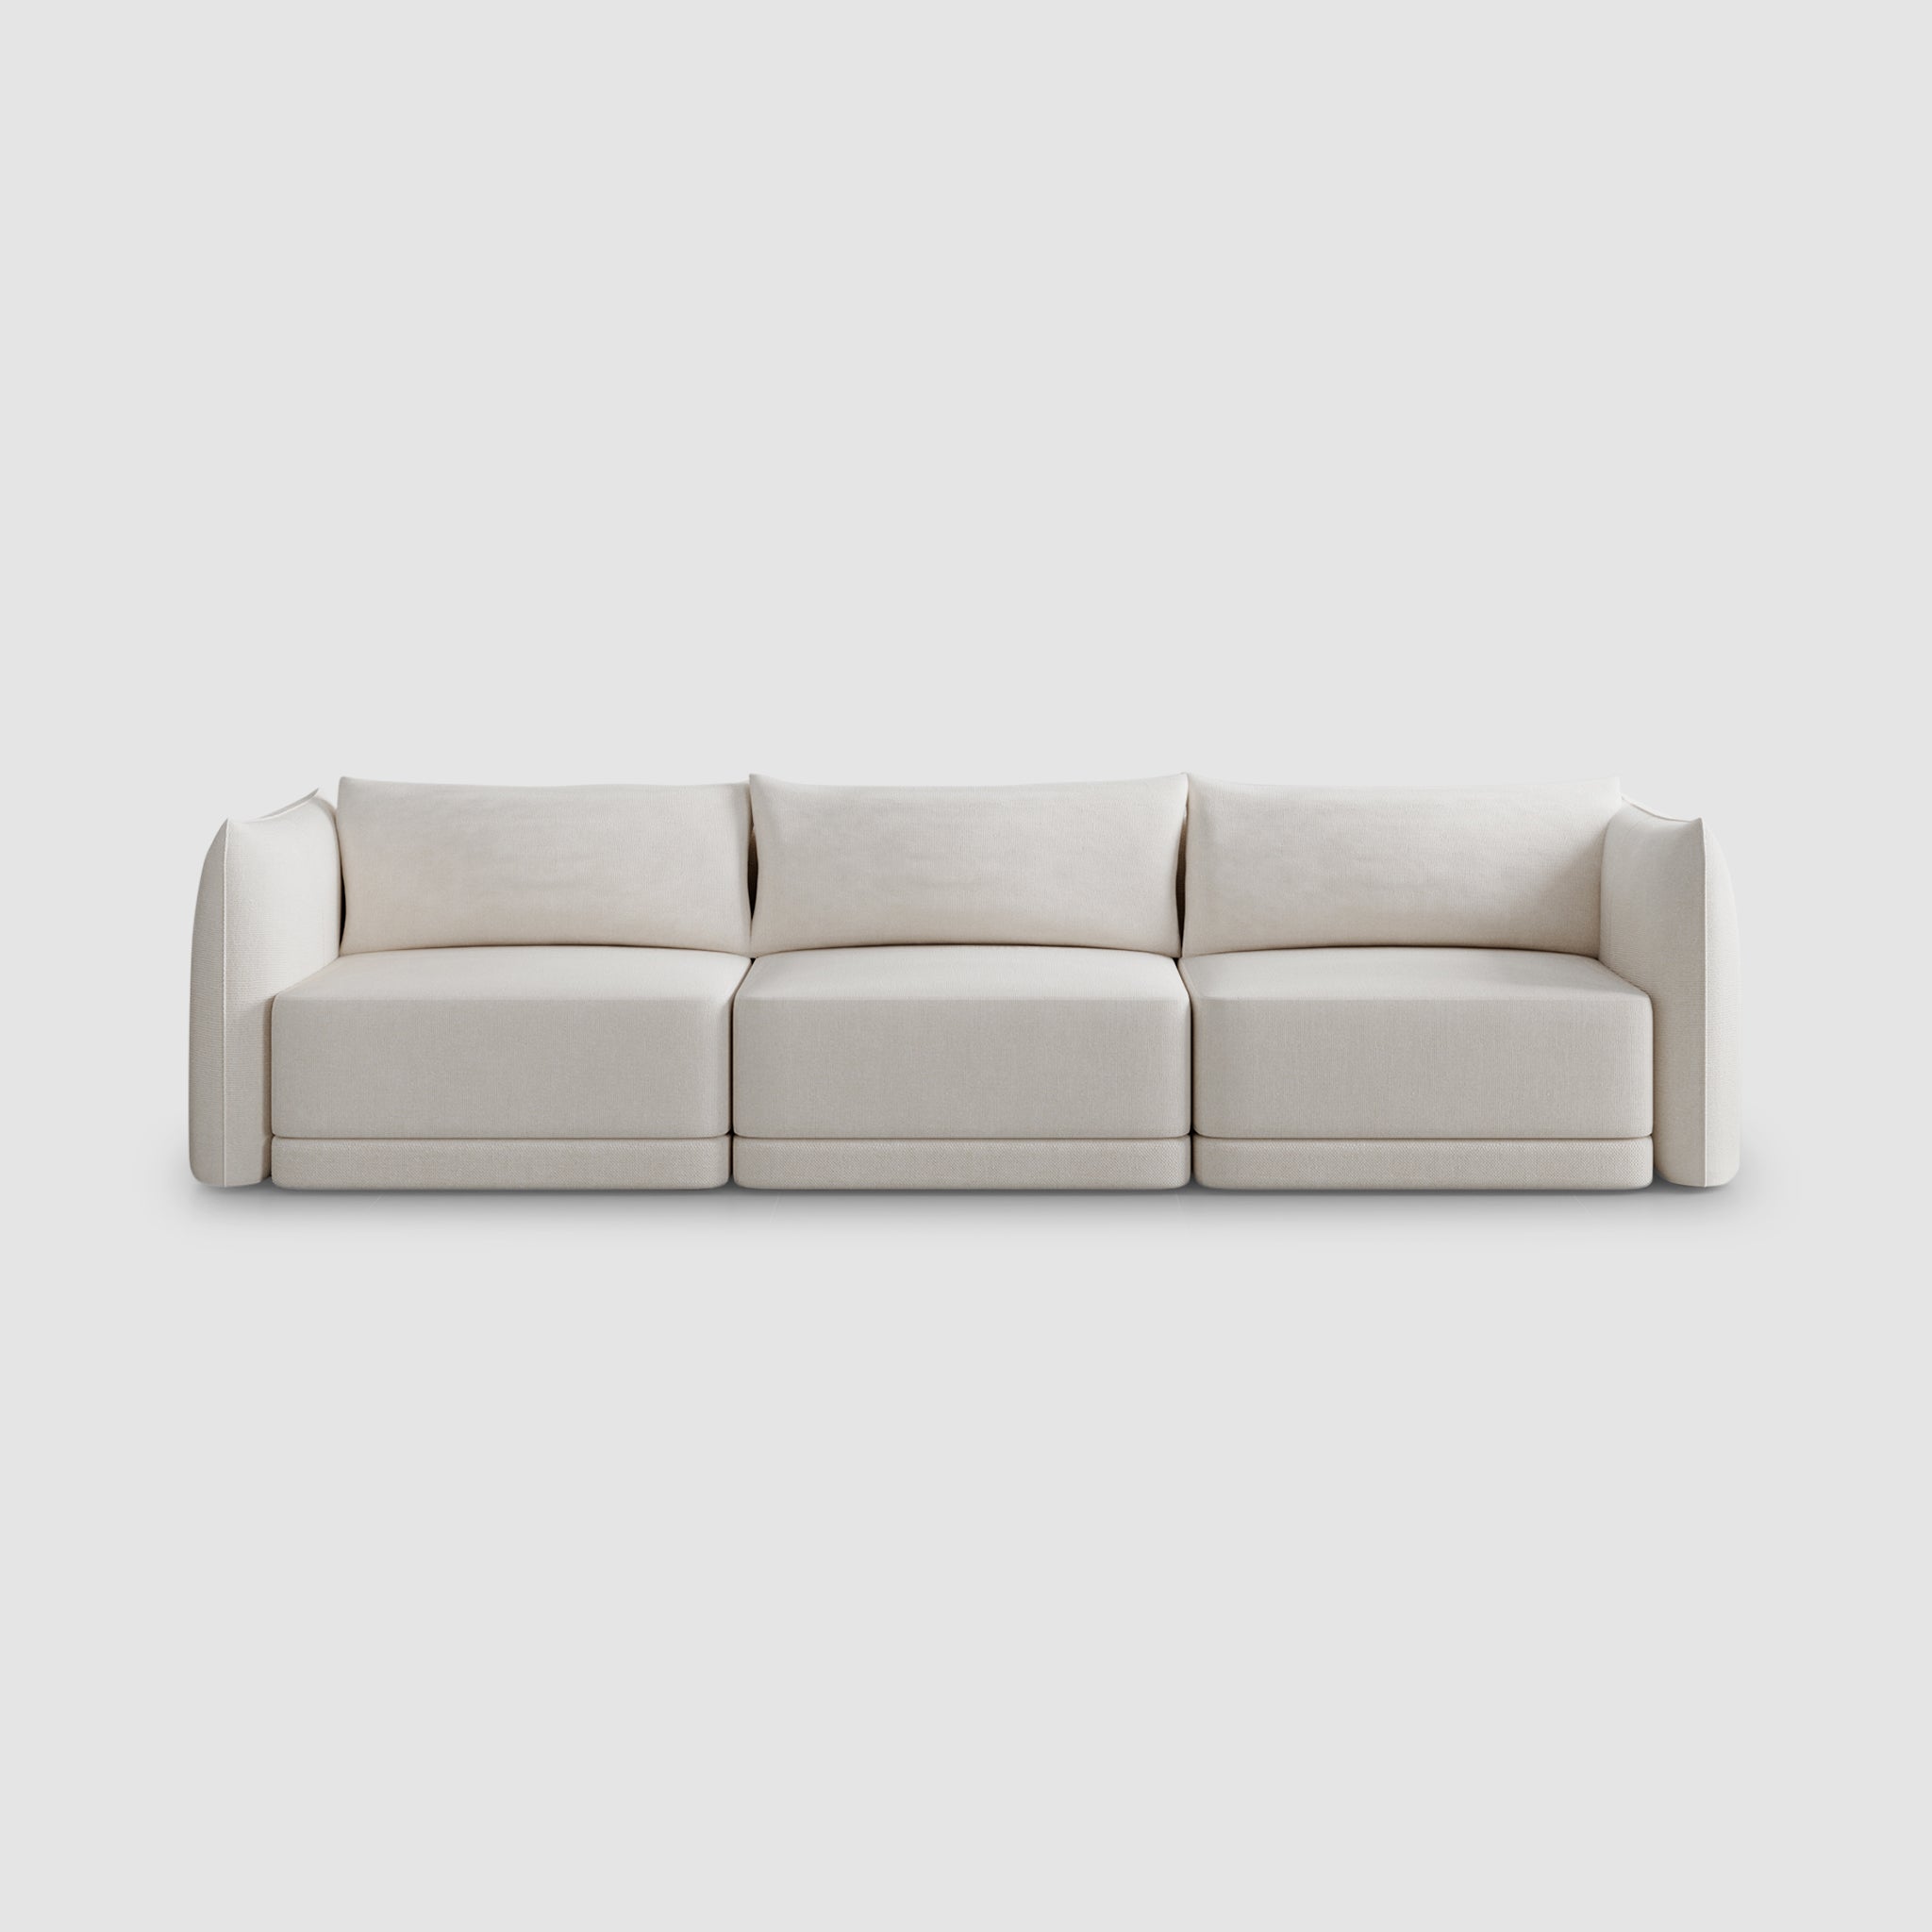 Elegant white three-seater sofa with a minimalist design, perfect for modern living room interiors.